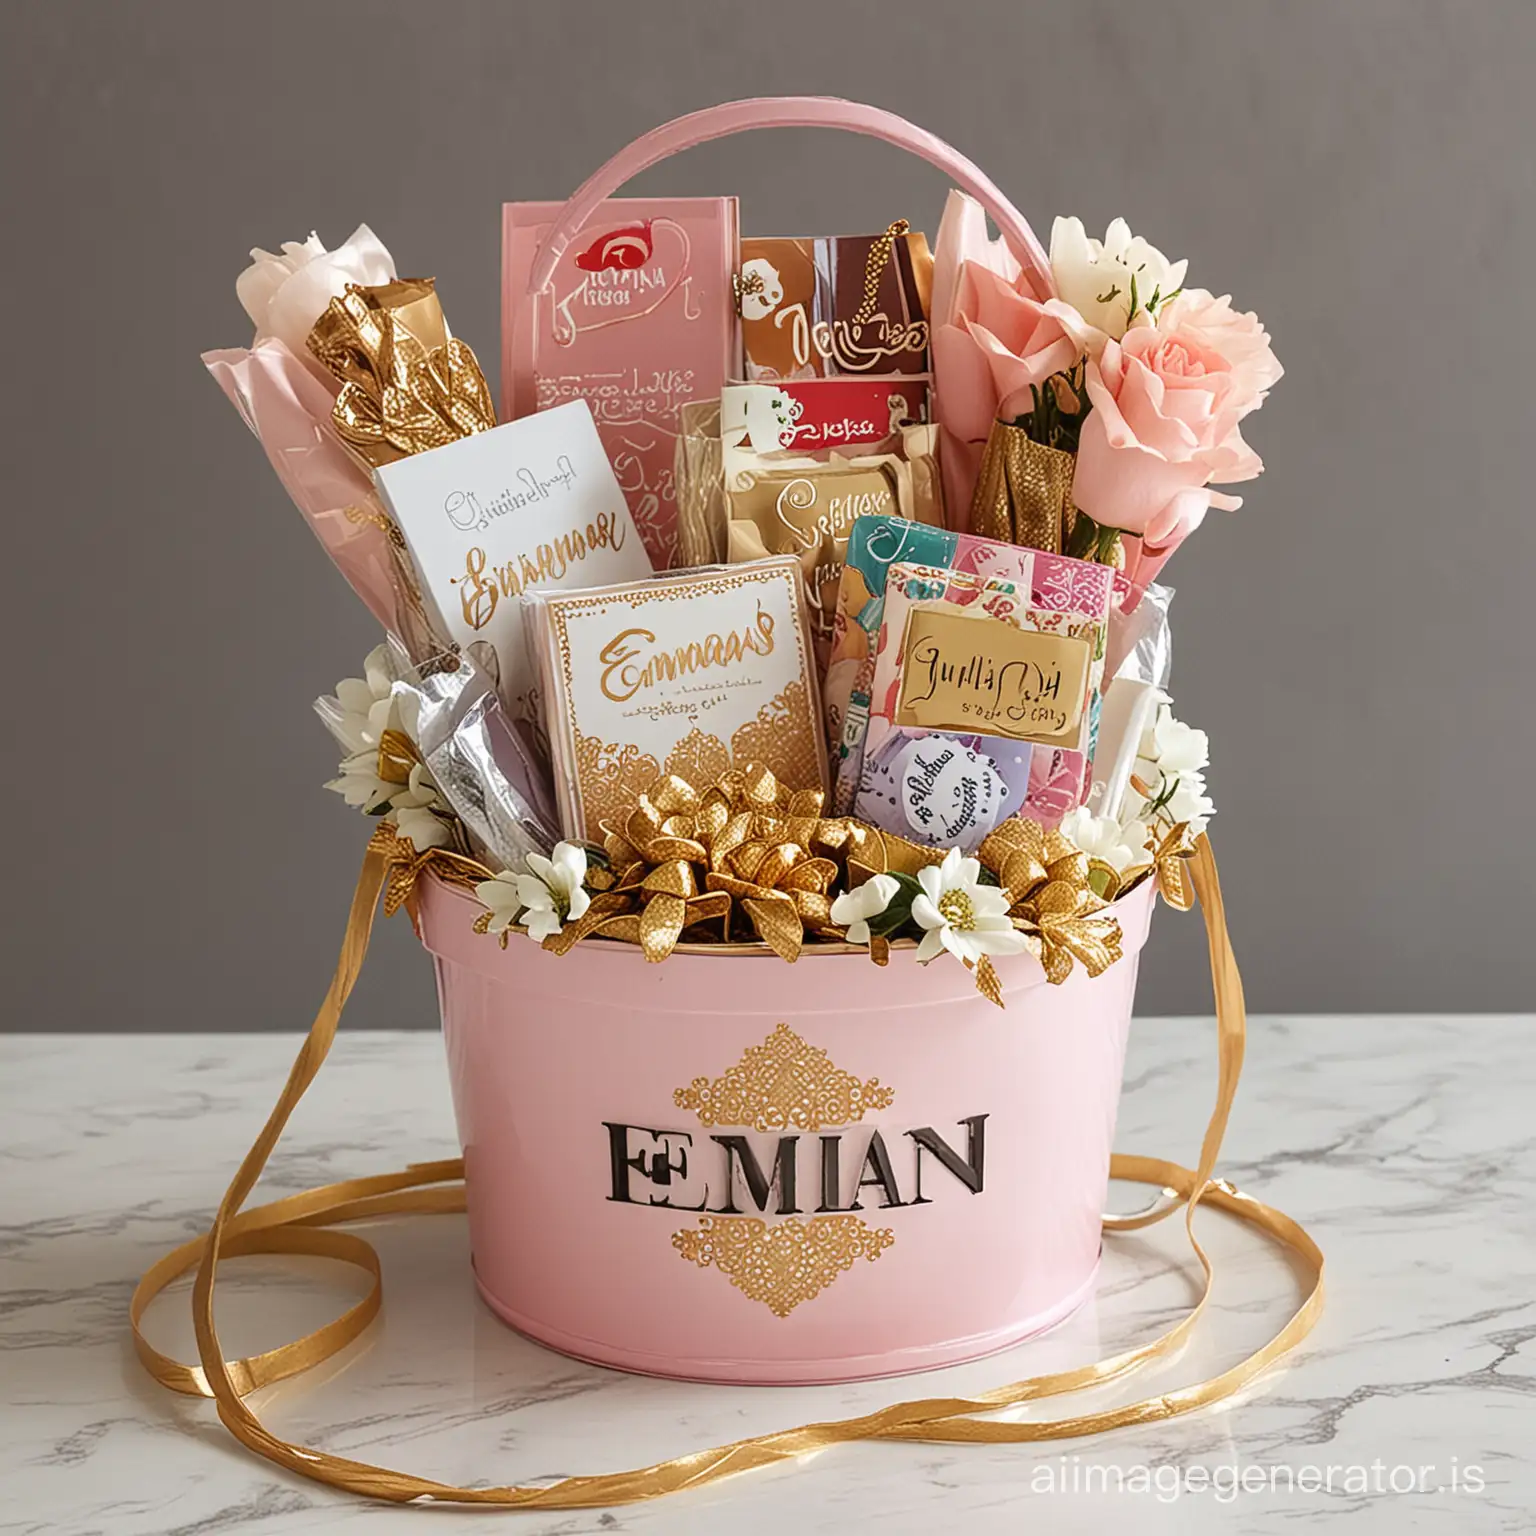 Simple Eid gift bucket with chocolates, bangles, flowers
 with name Eman on it
